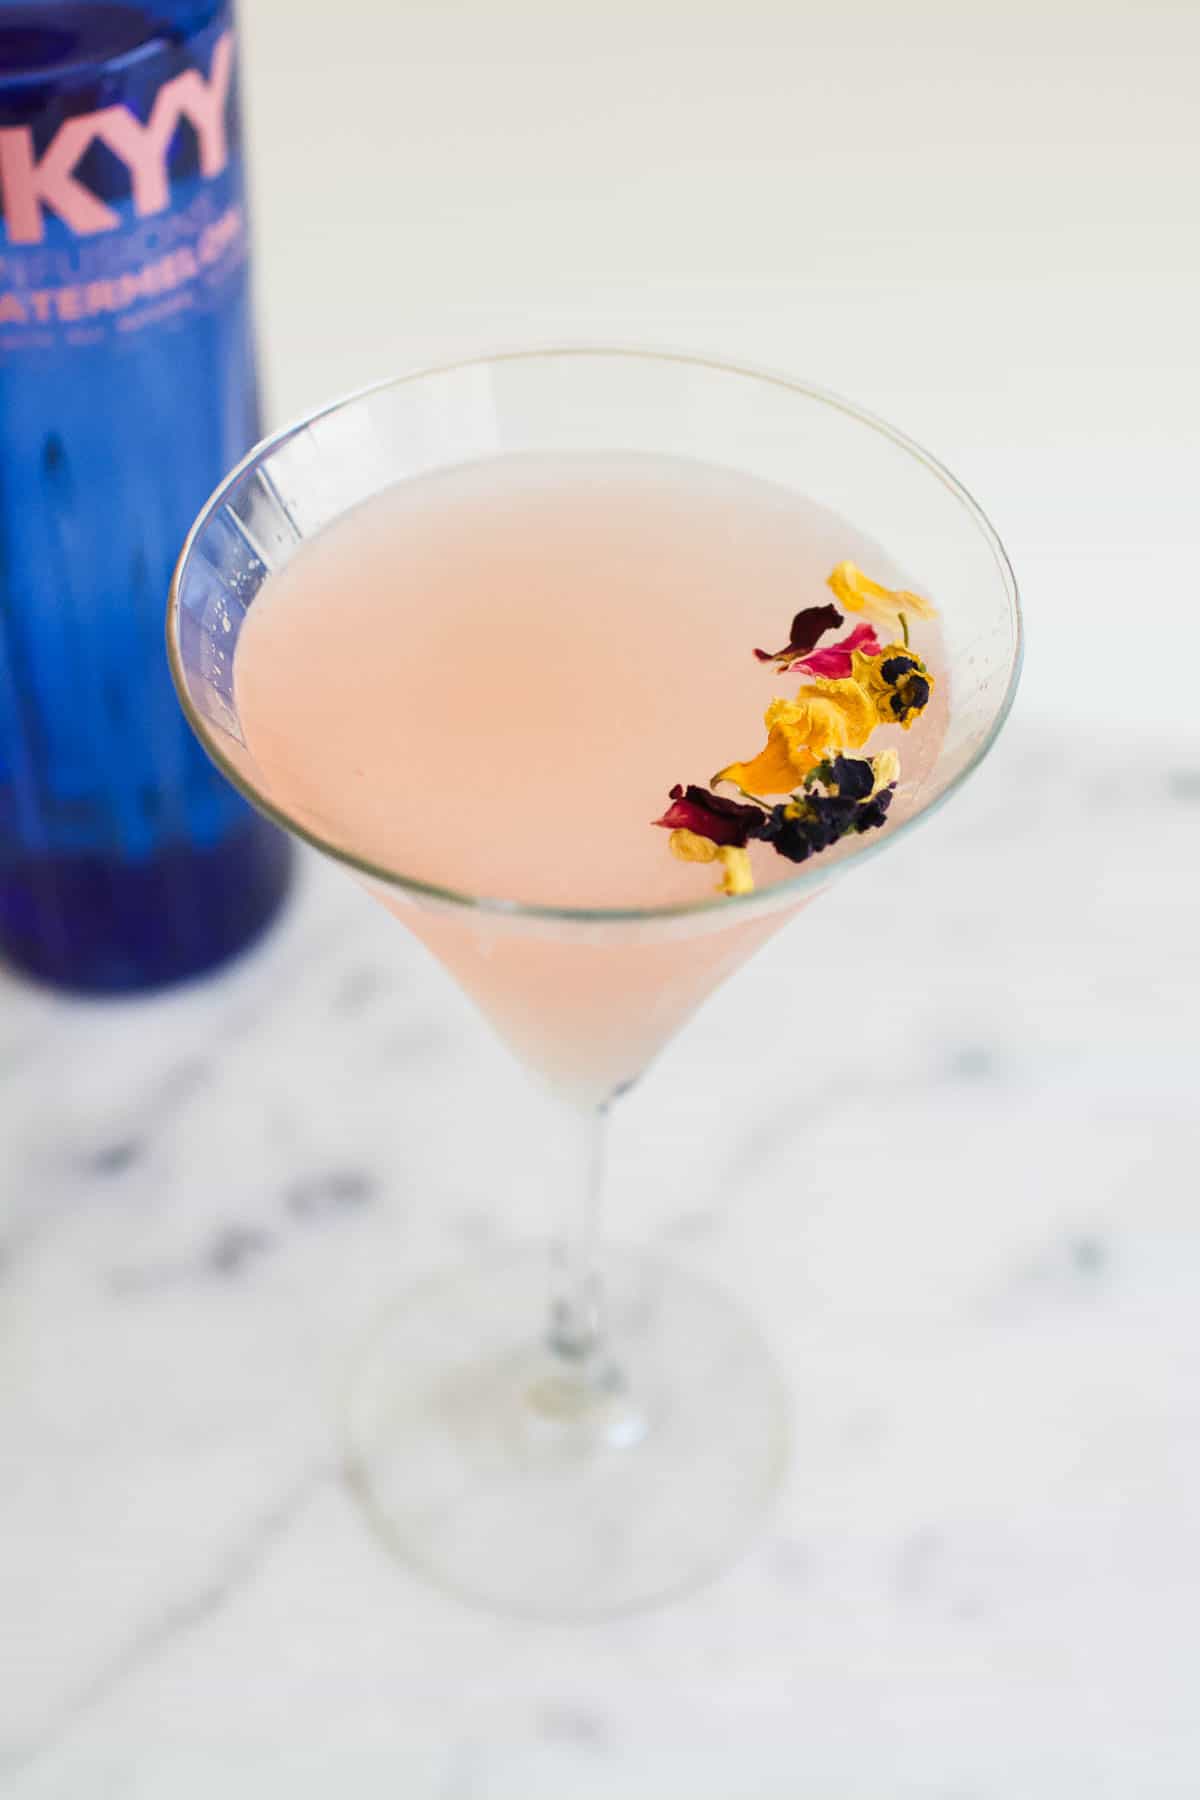 Edible flowers garnishing a pink watermelon gimlet in a martini glass.